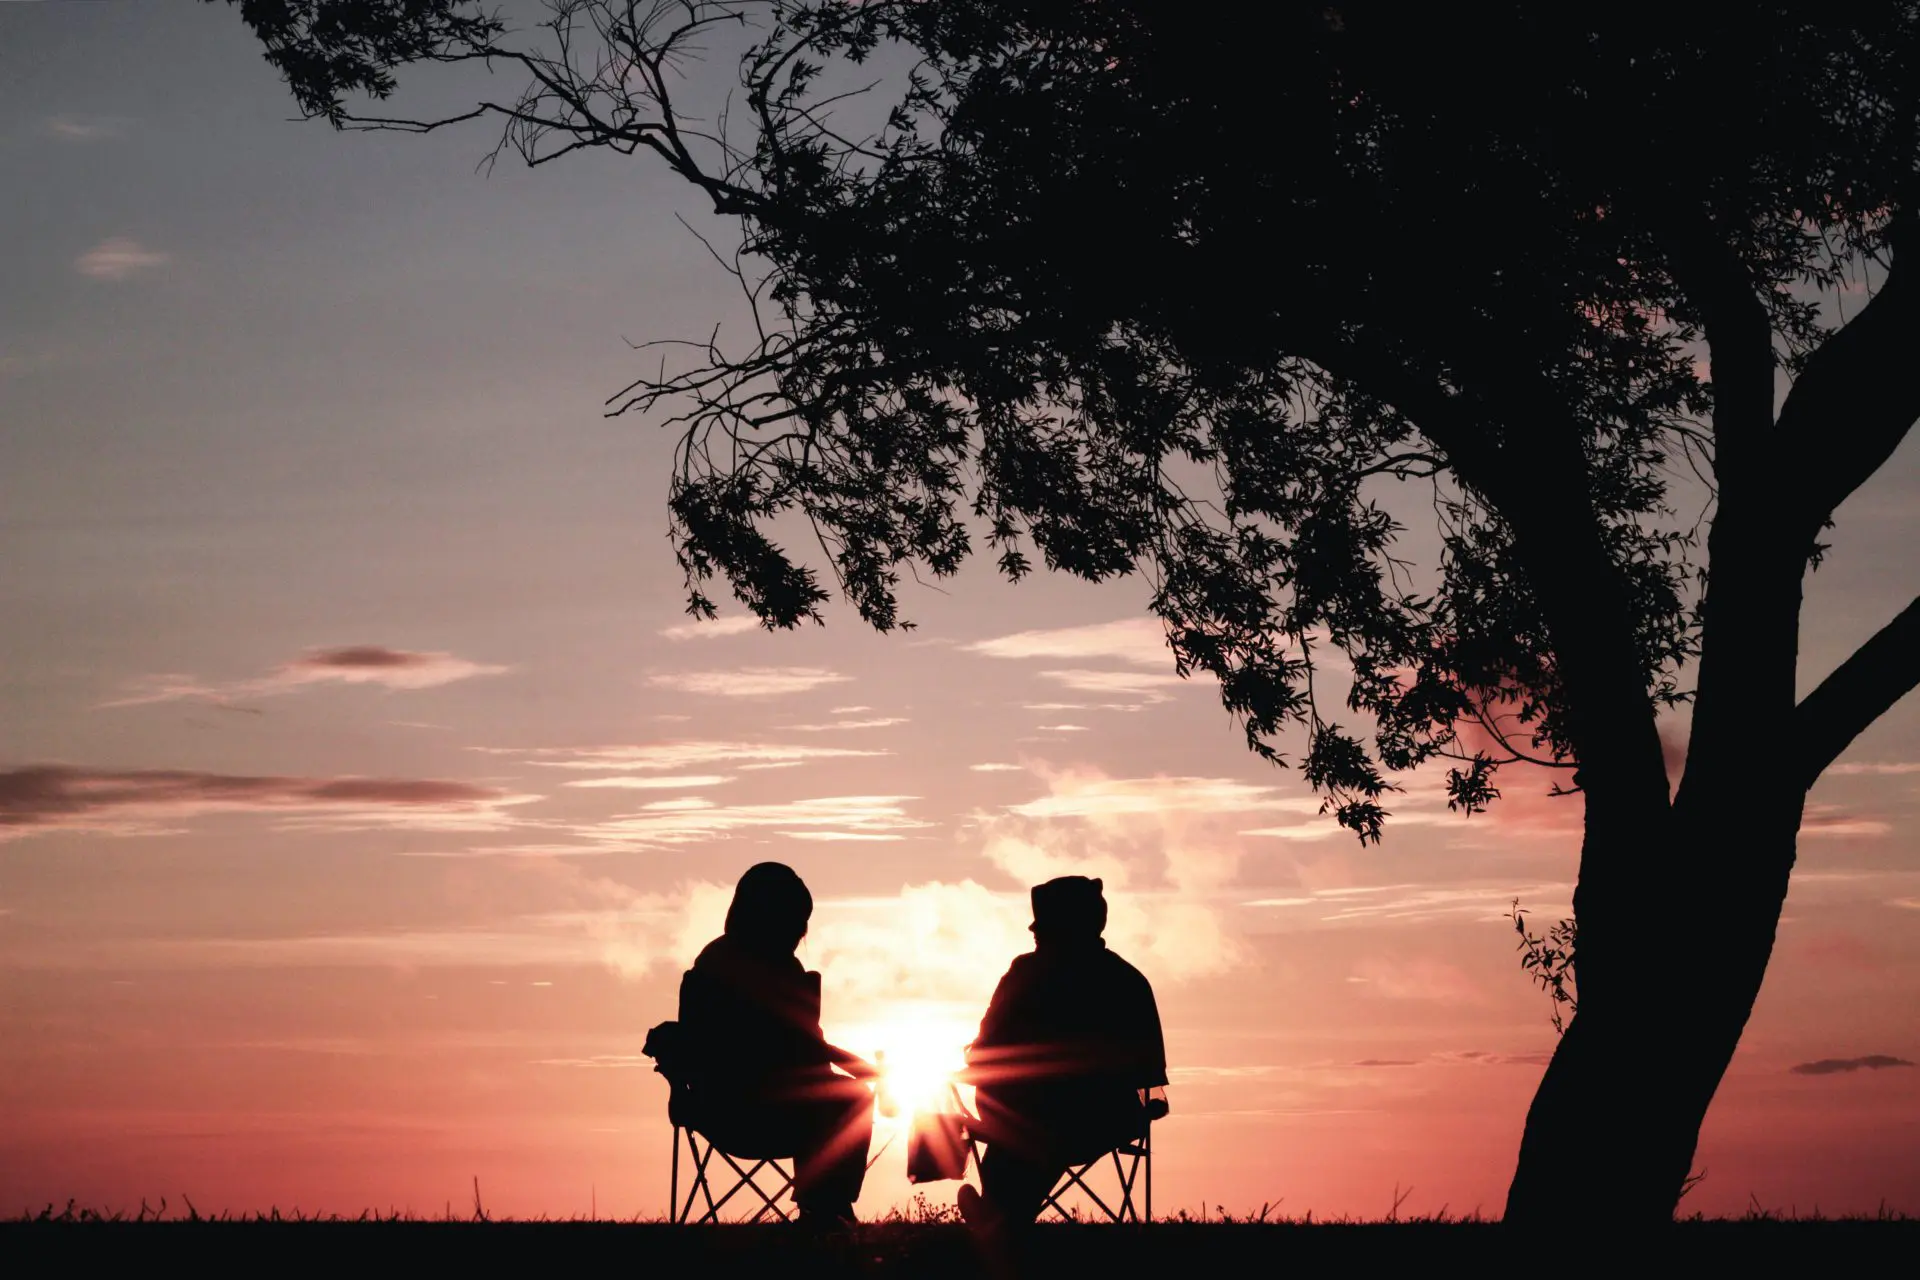 Two people silhouetted against the sunset